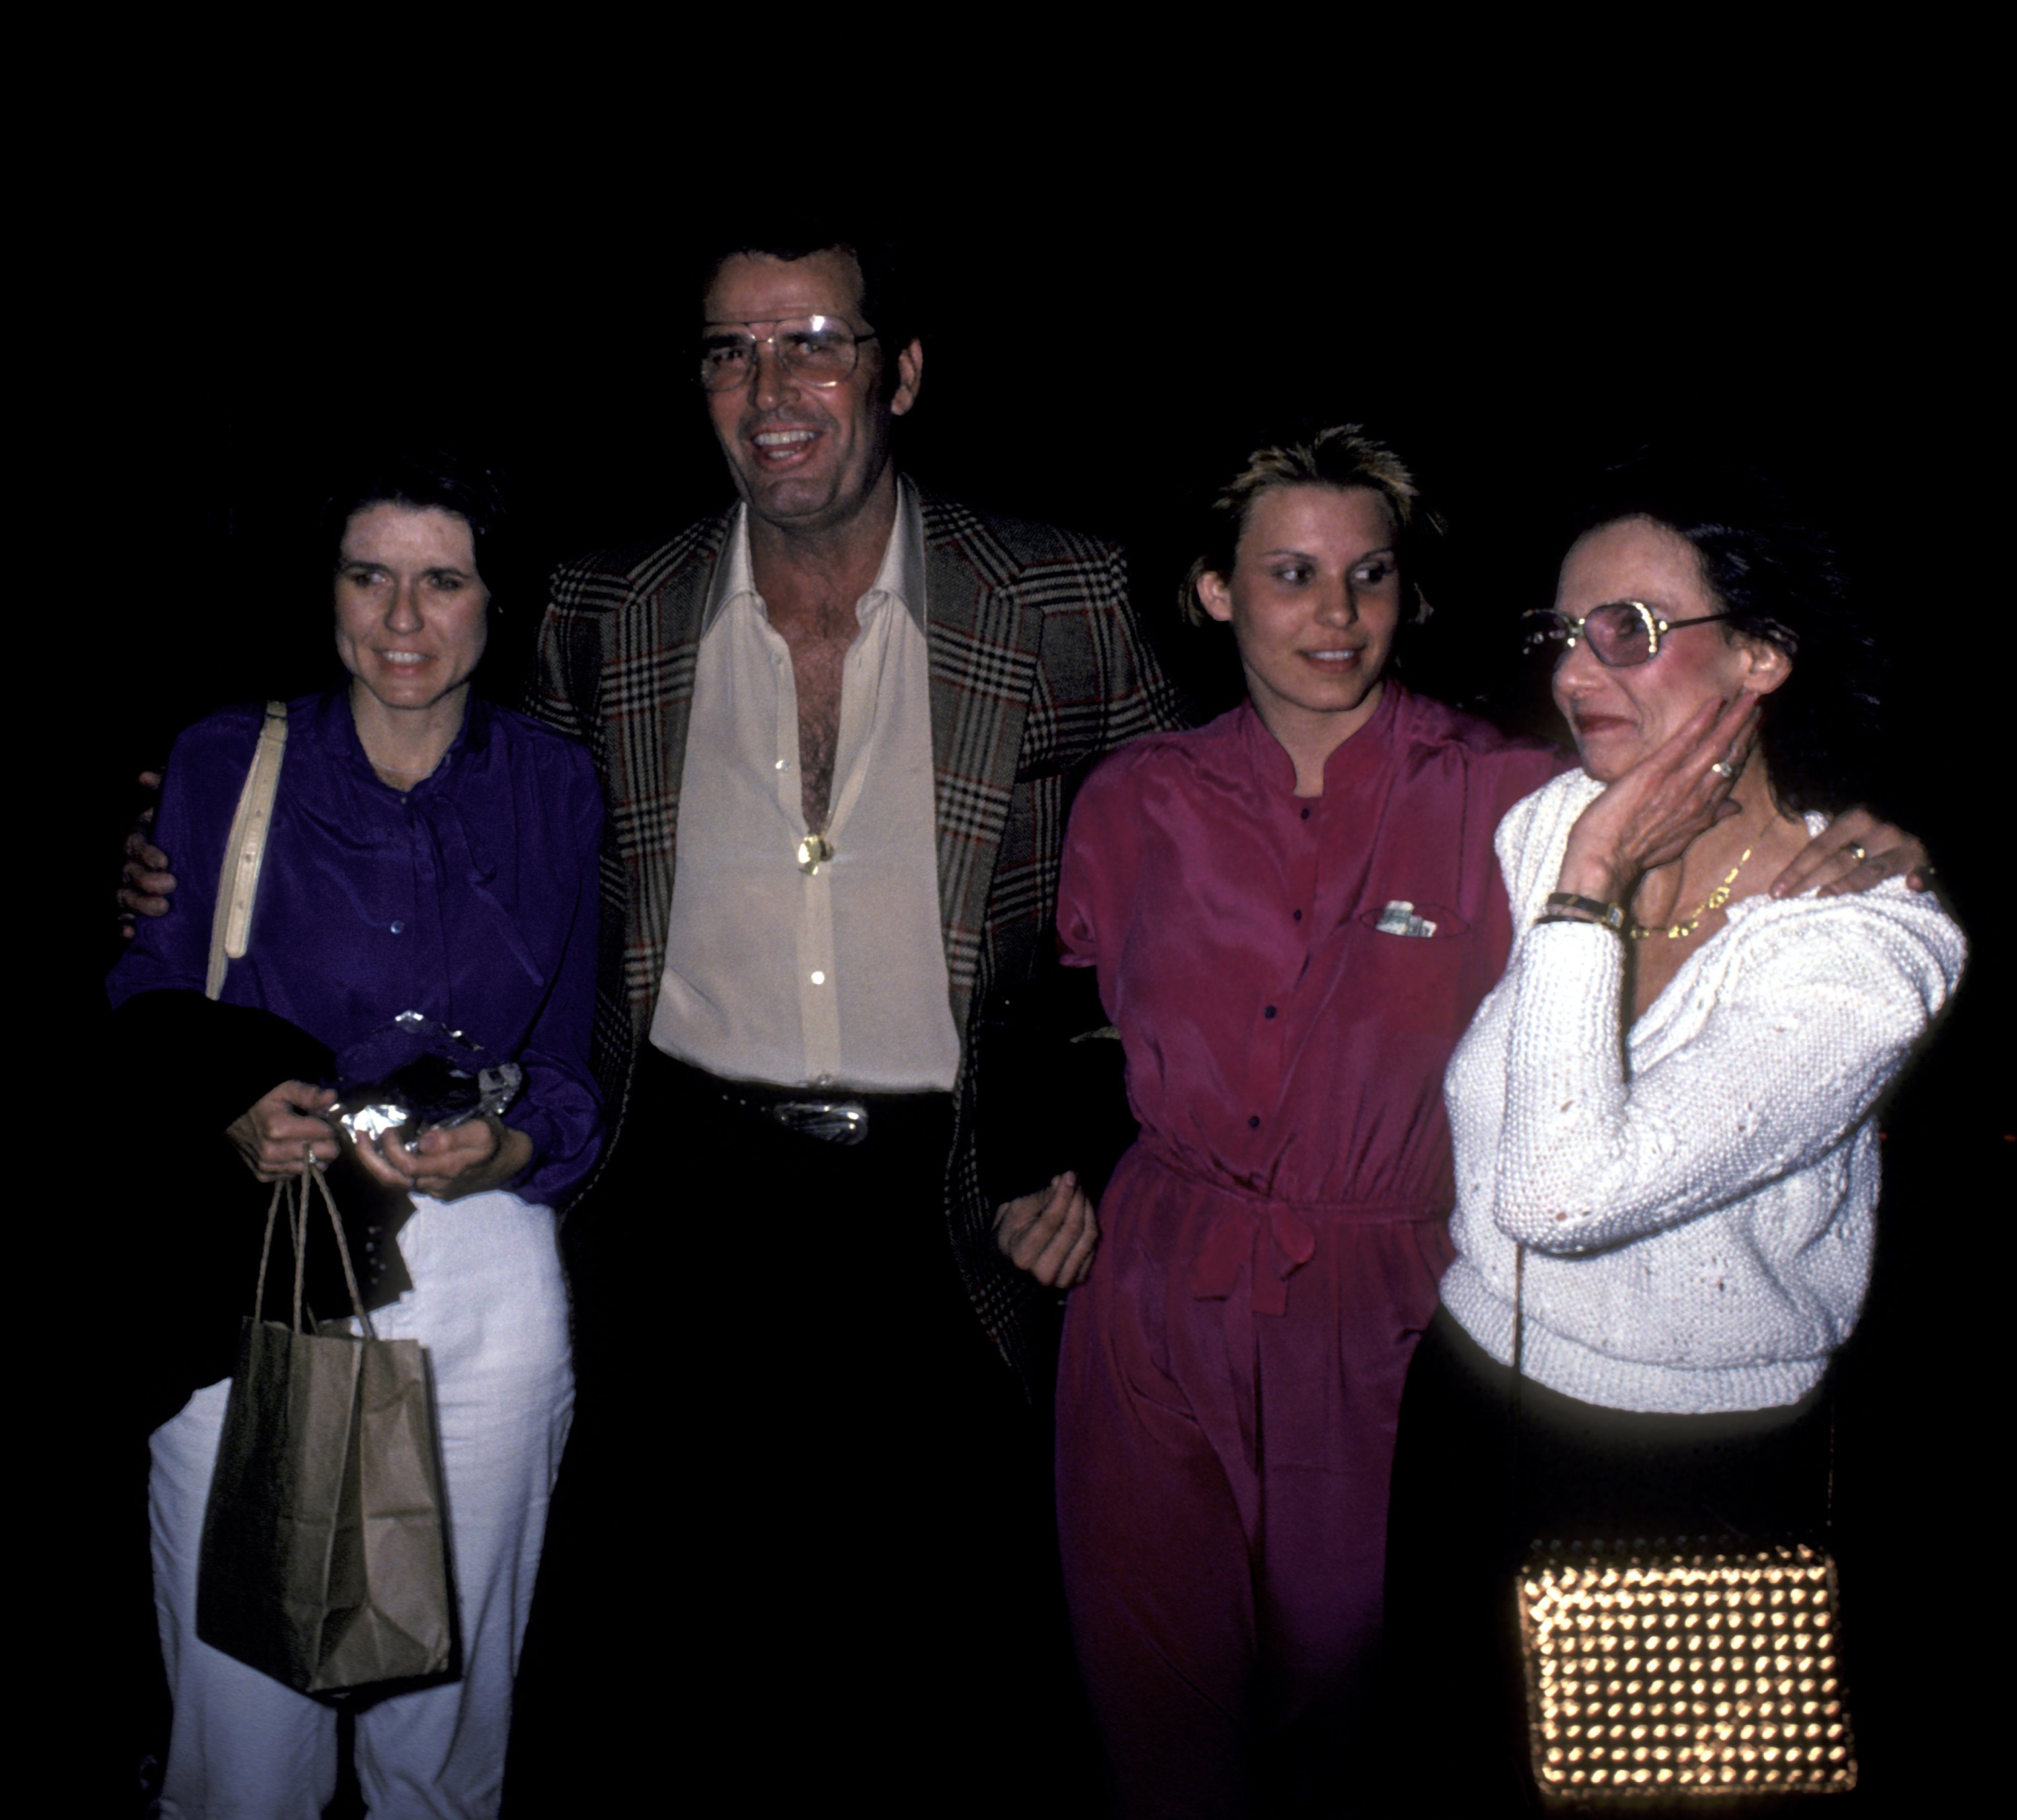 James Garner, his wife Lois Garner, and daughters Kimberly Garner and Greta Garner were sighted on April 7, 1980, at Le Dome Restaurant in West Hollywood, California. | Source: Getty Images